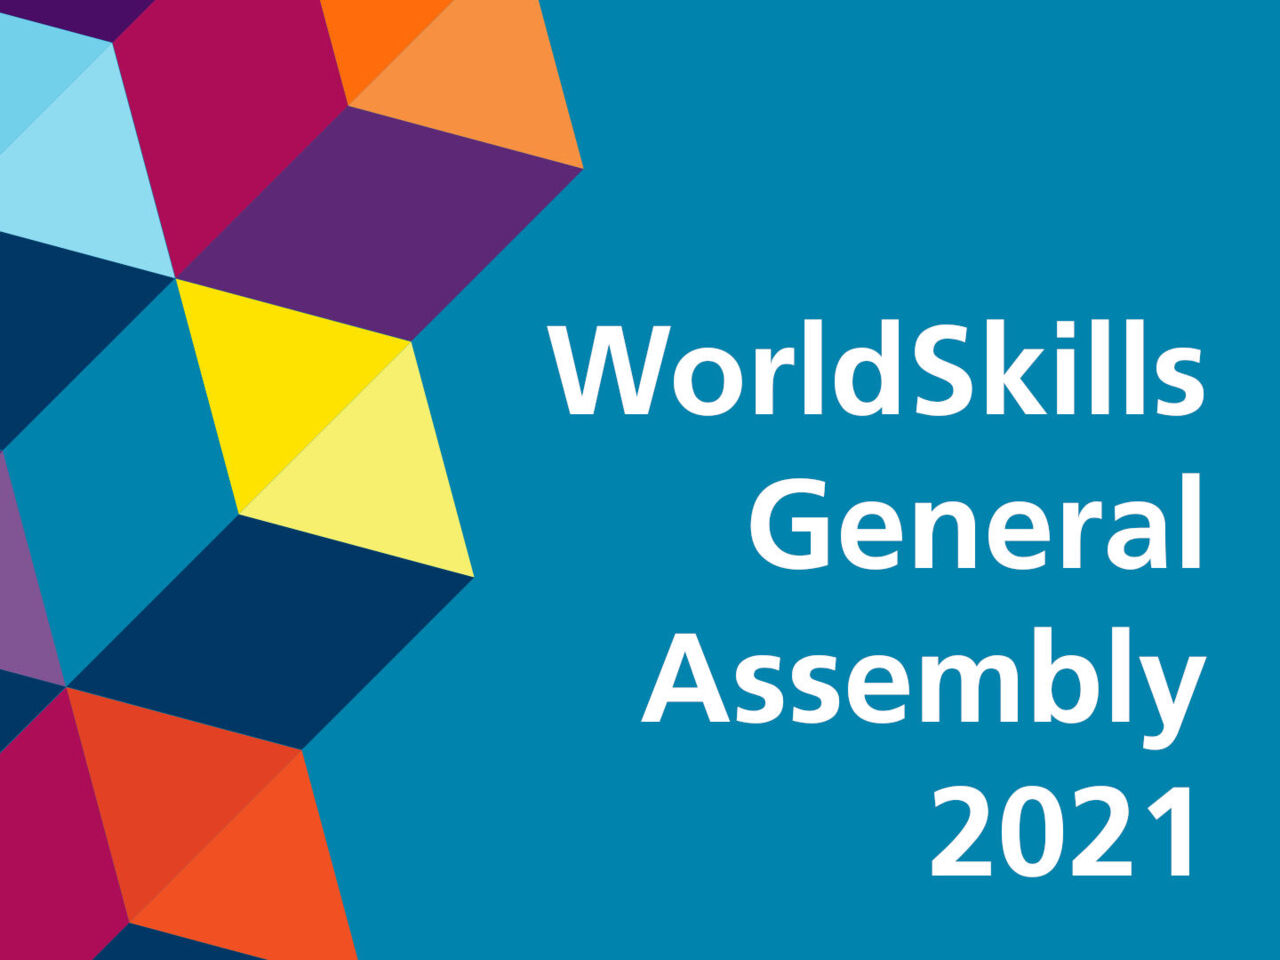 WorldSkills General Assembly 2021 concludes